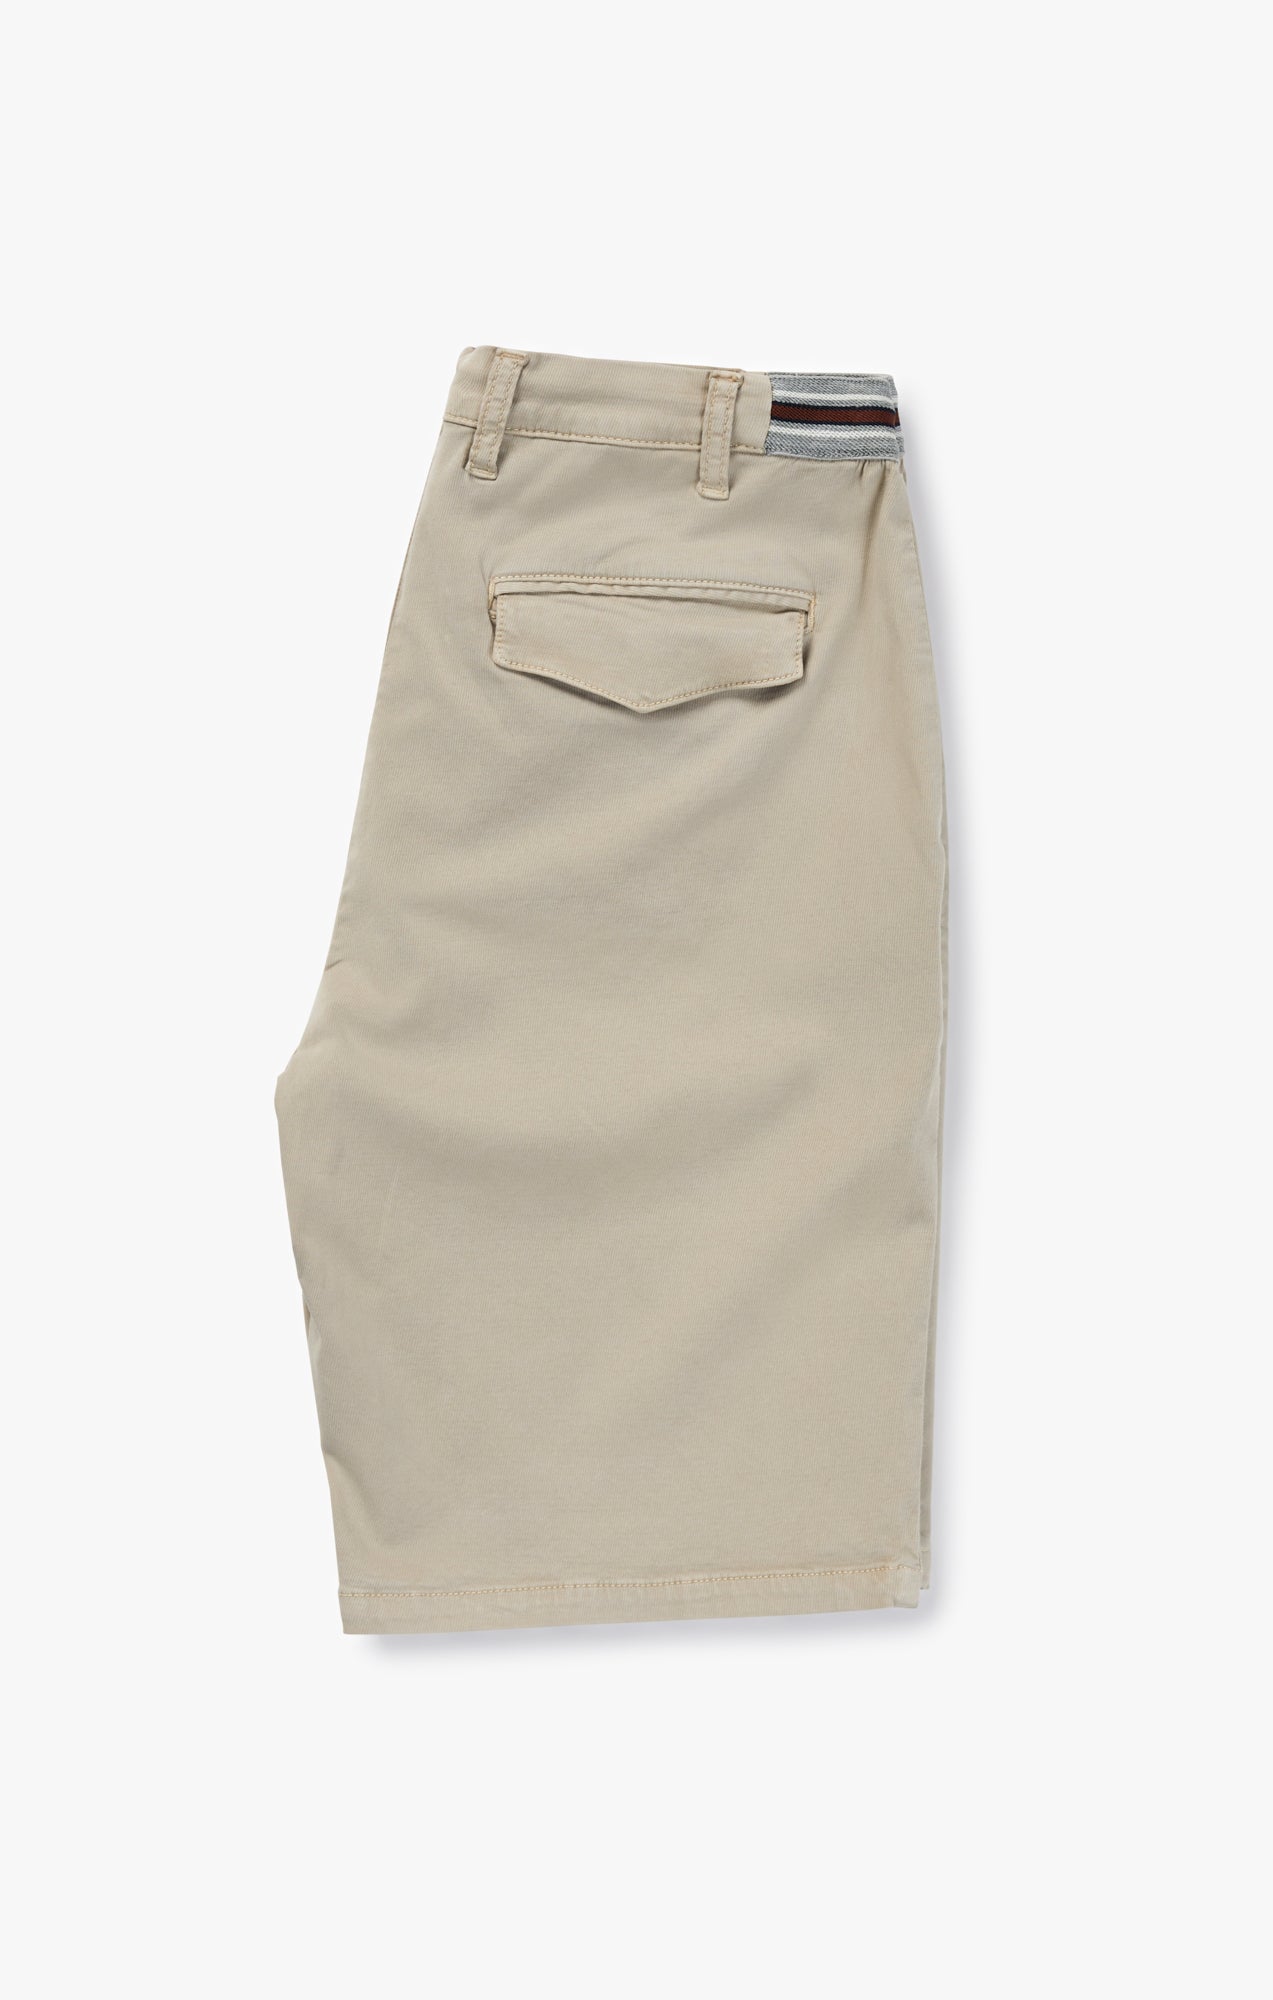 Ravenna Drawstring Shorts In Sand Soft Touch Image 8